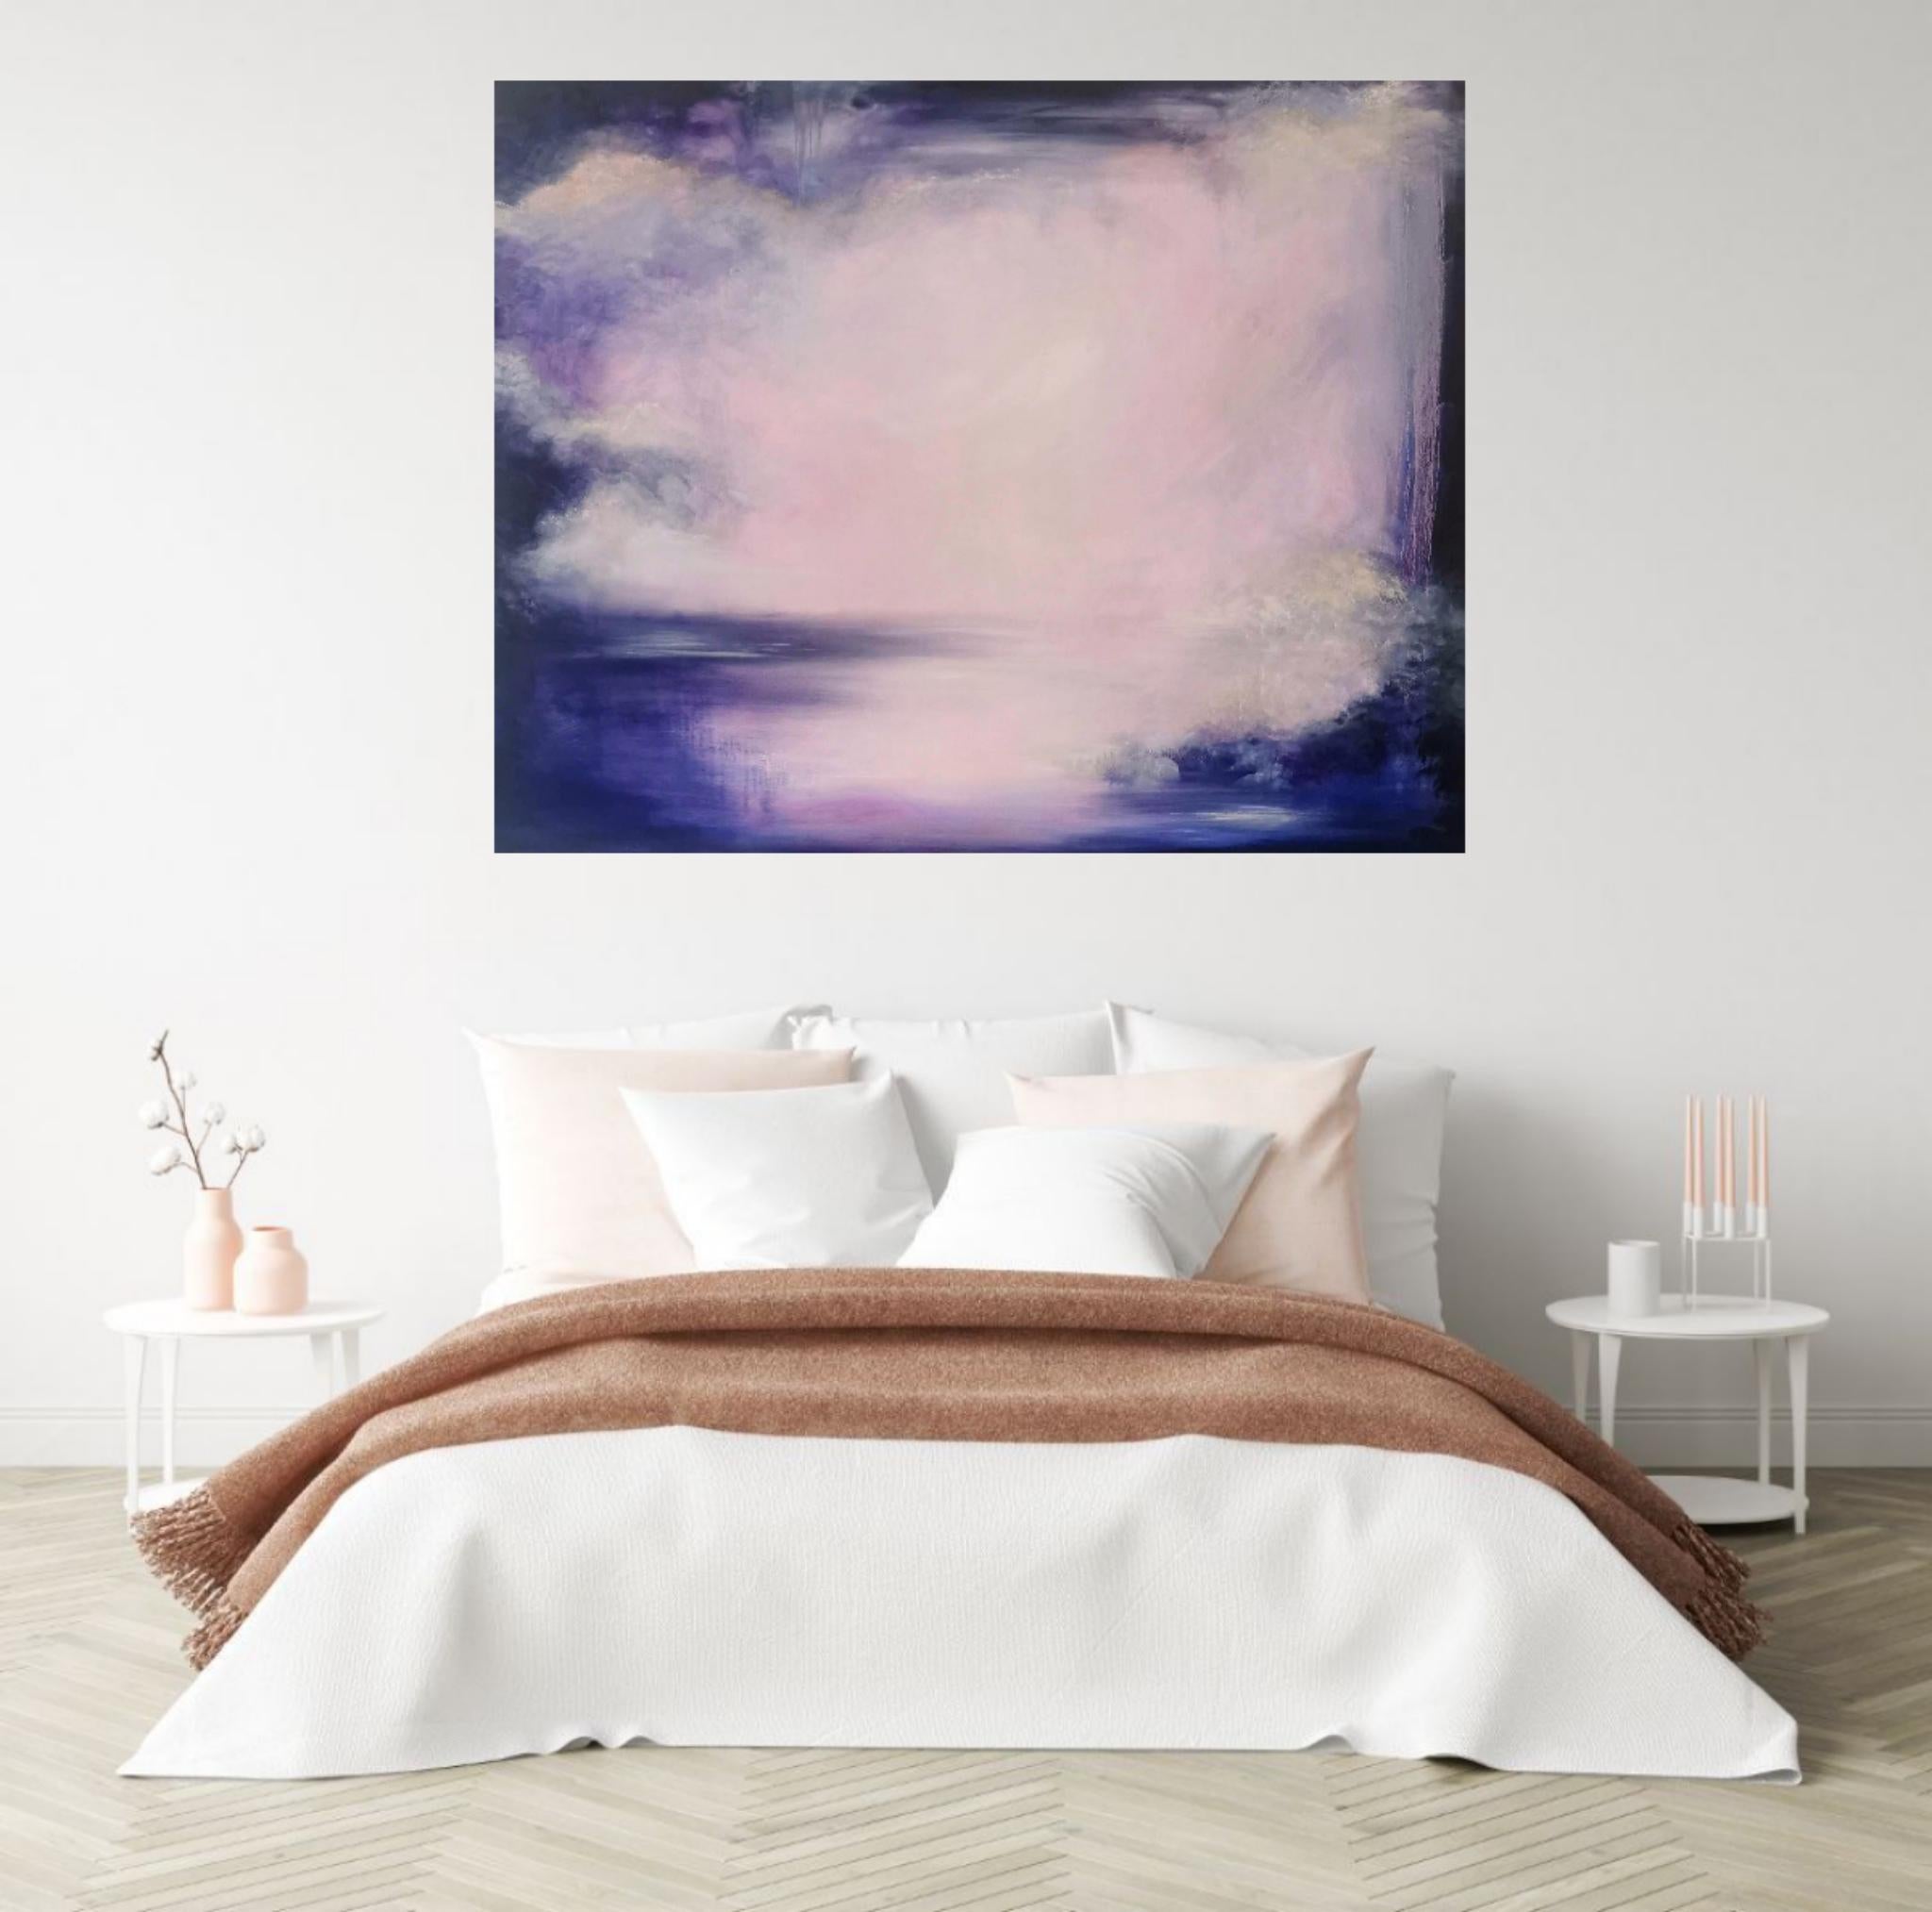 Violet night of the soul - Large violet abstract landscape painting 5